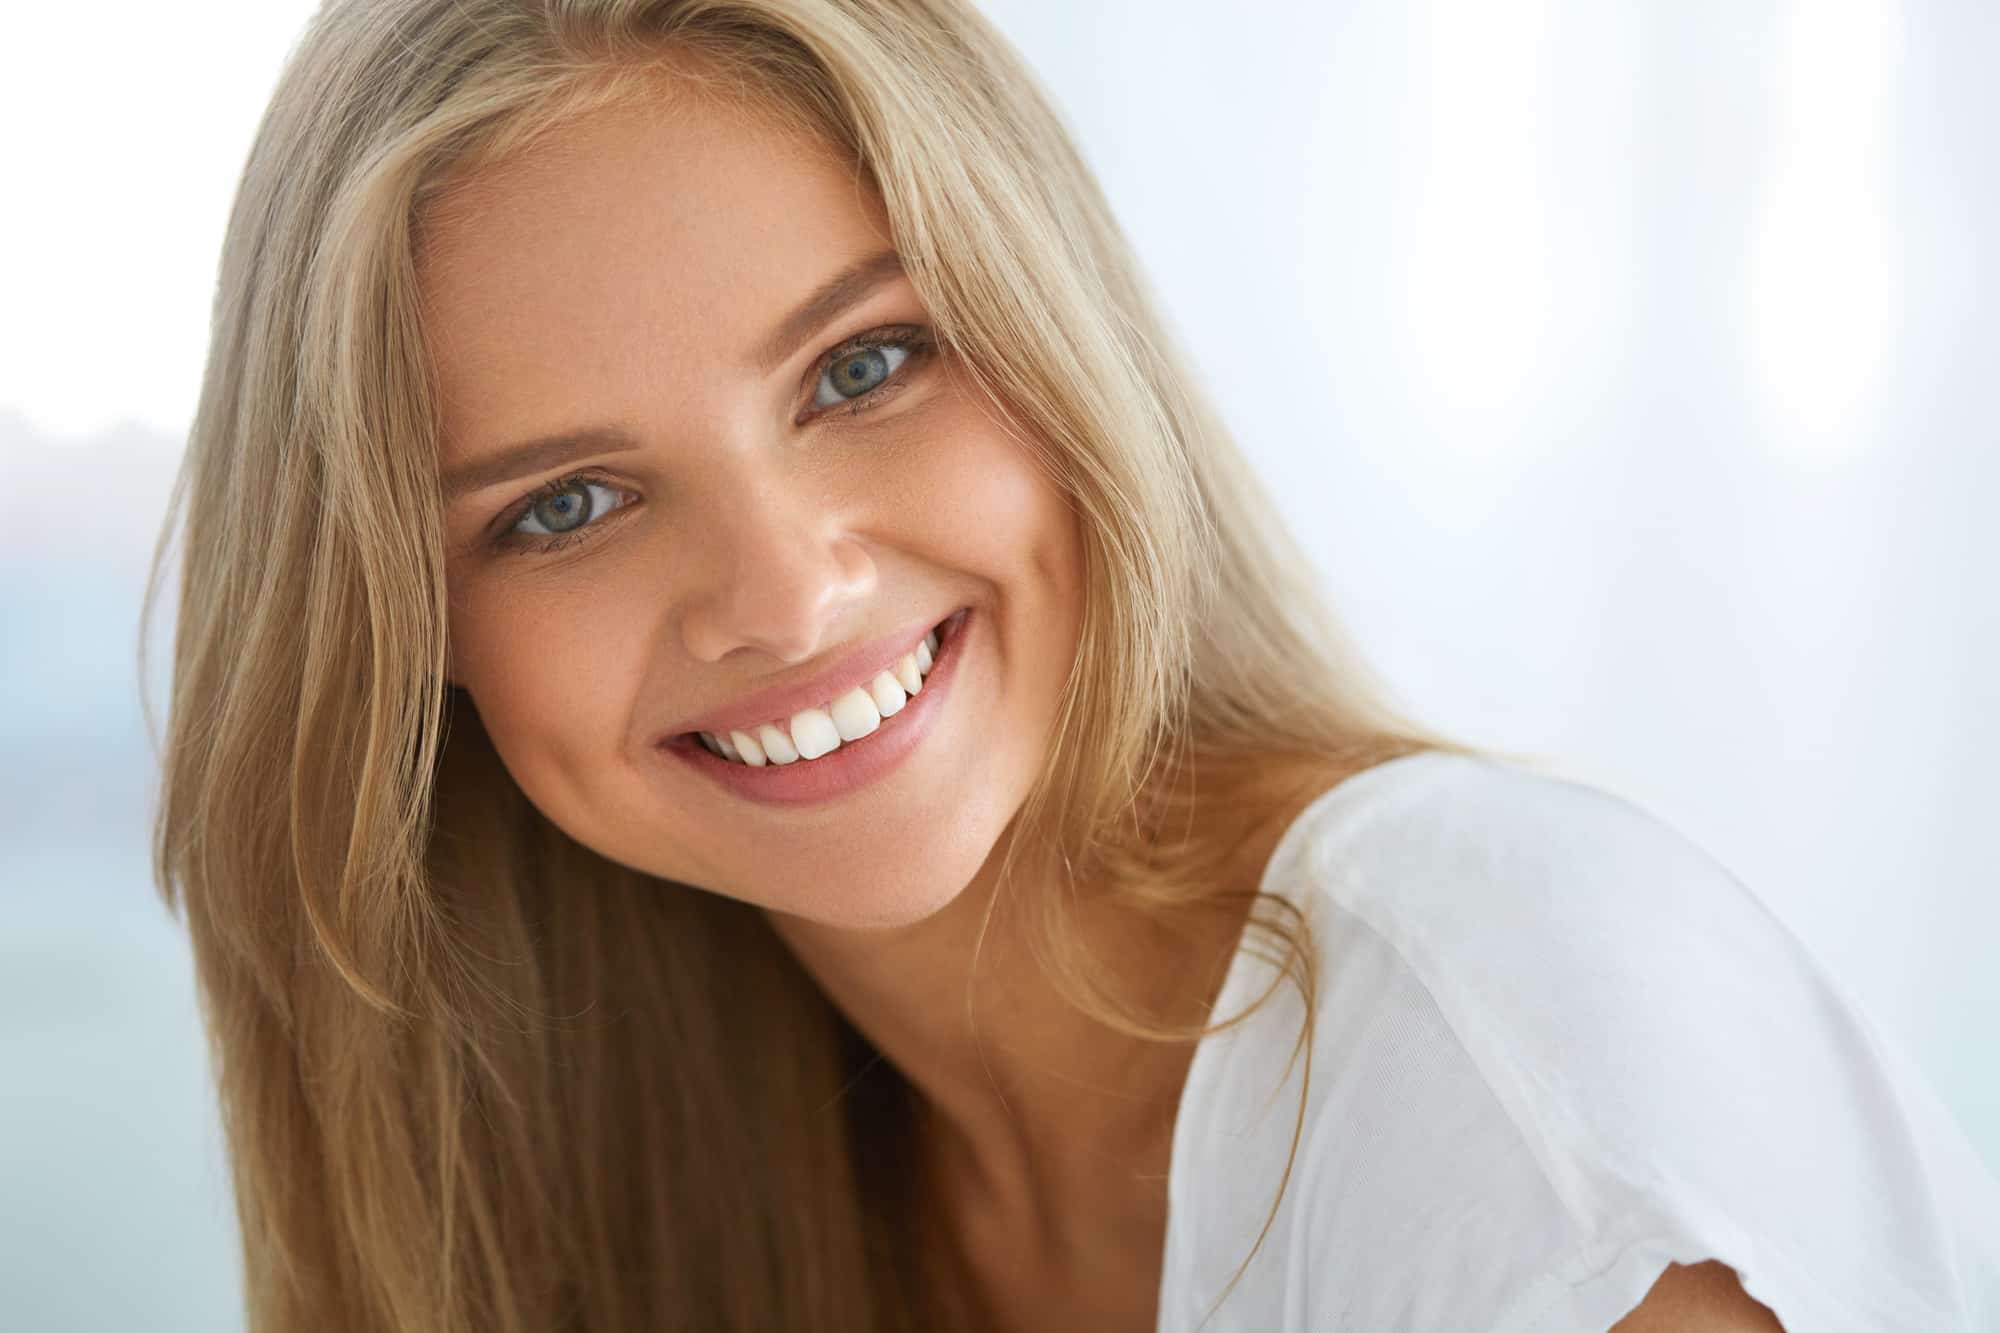 Invisalign Time: What You Should Know Before Getting Invisalign